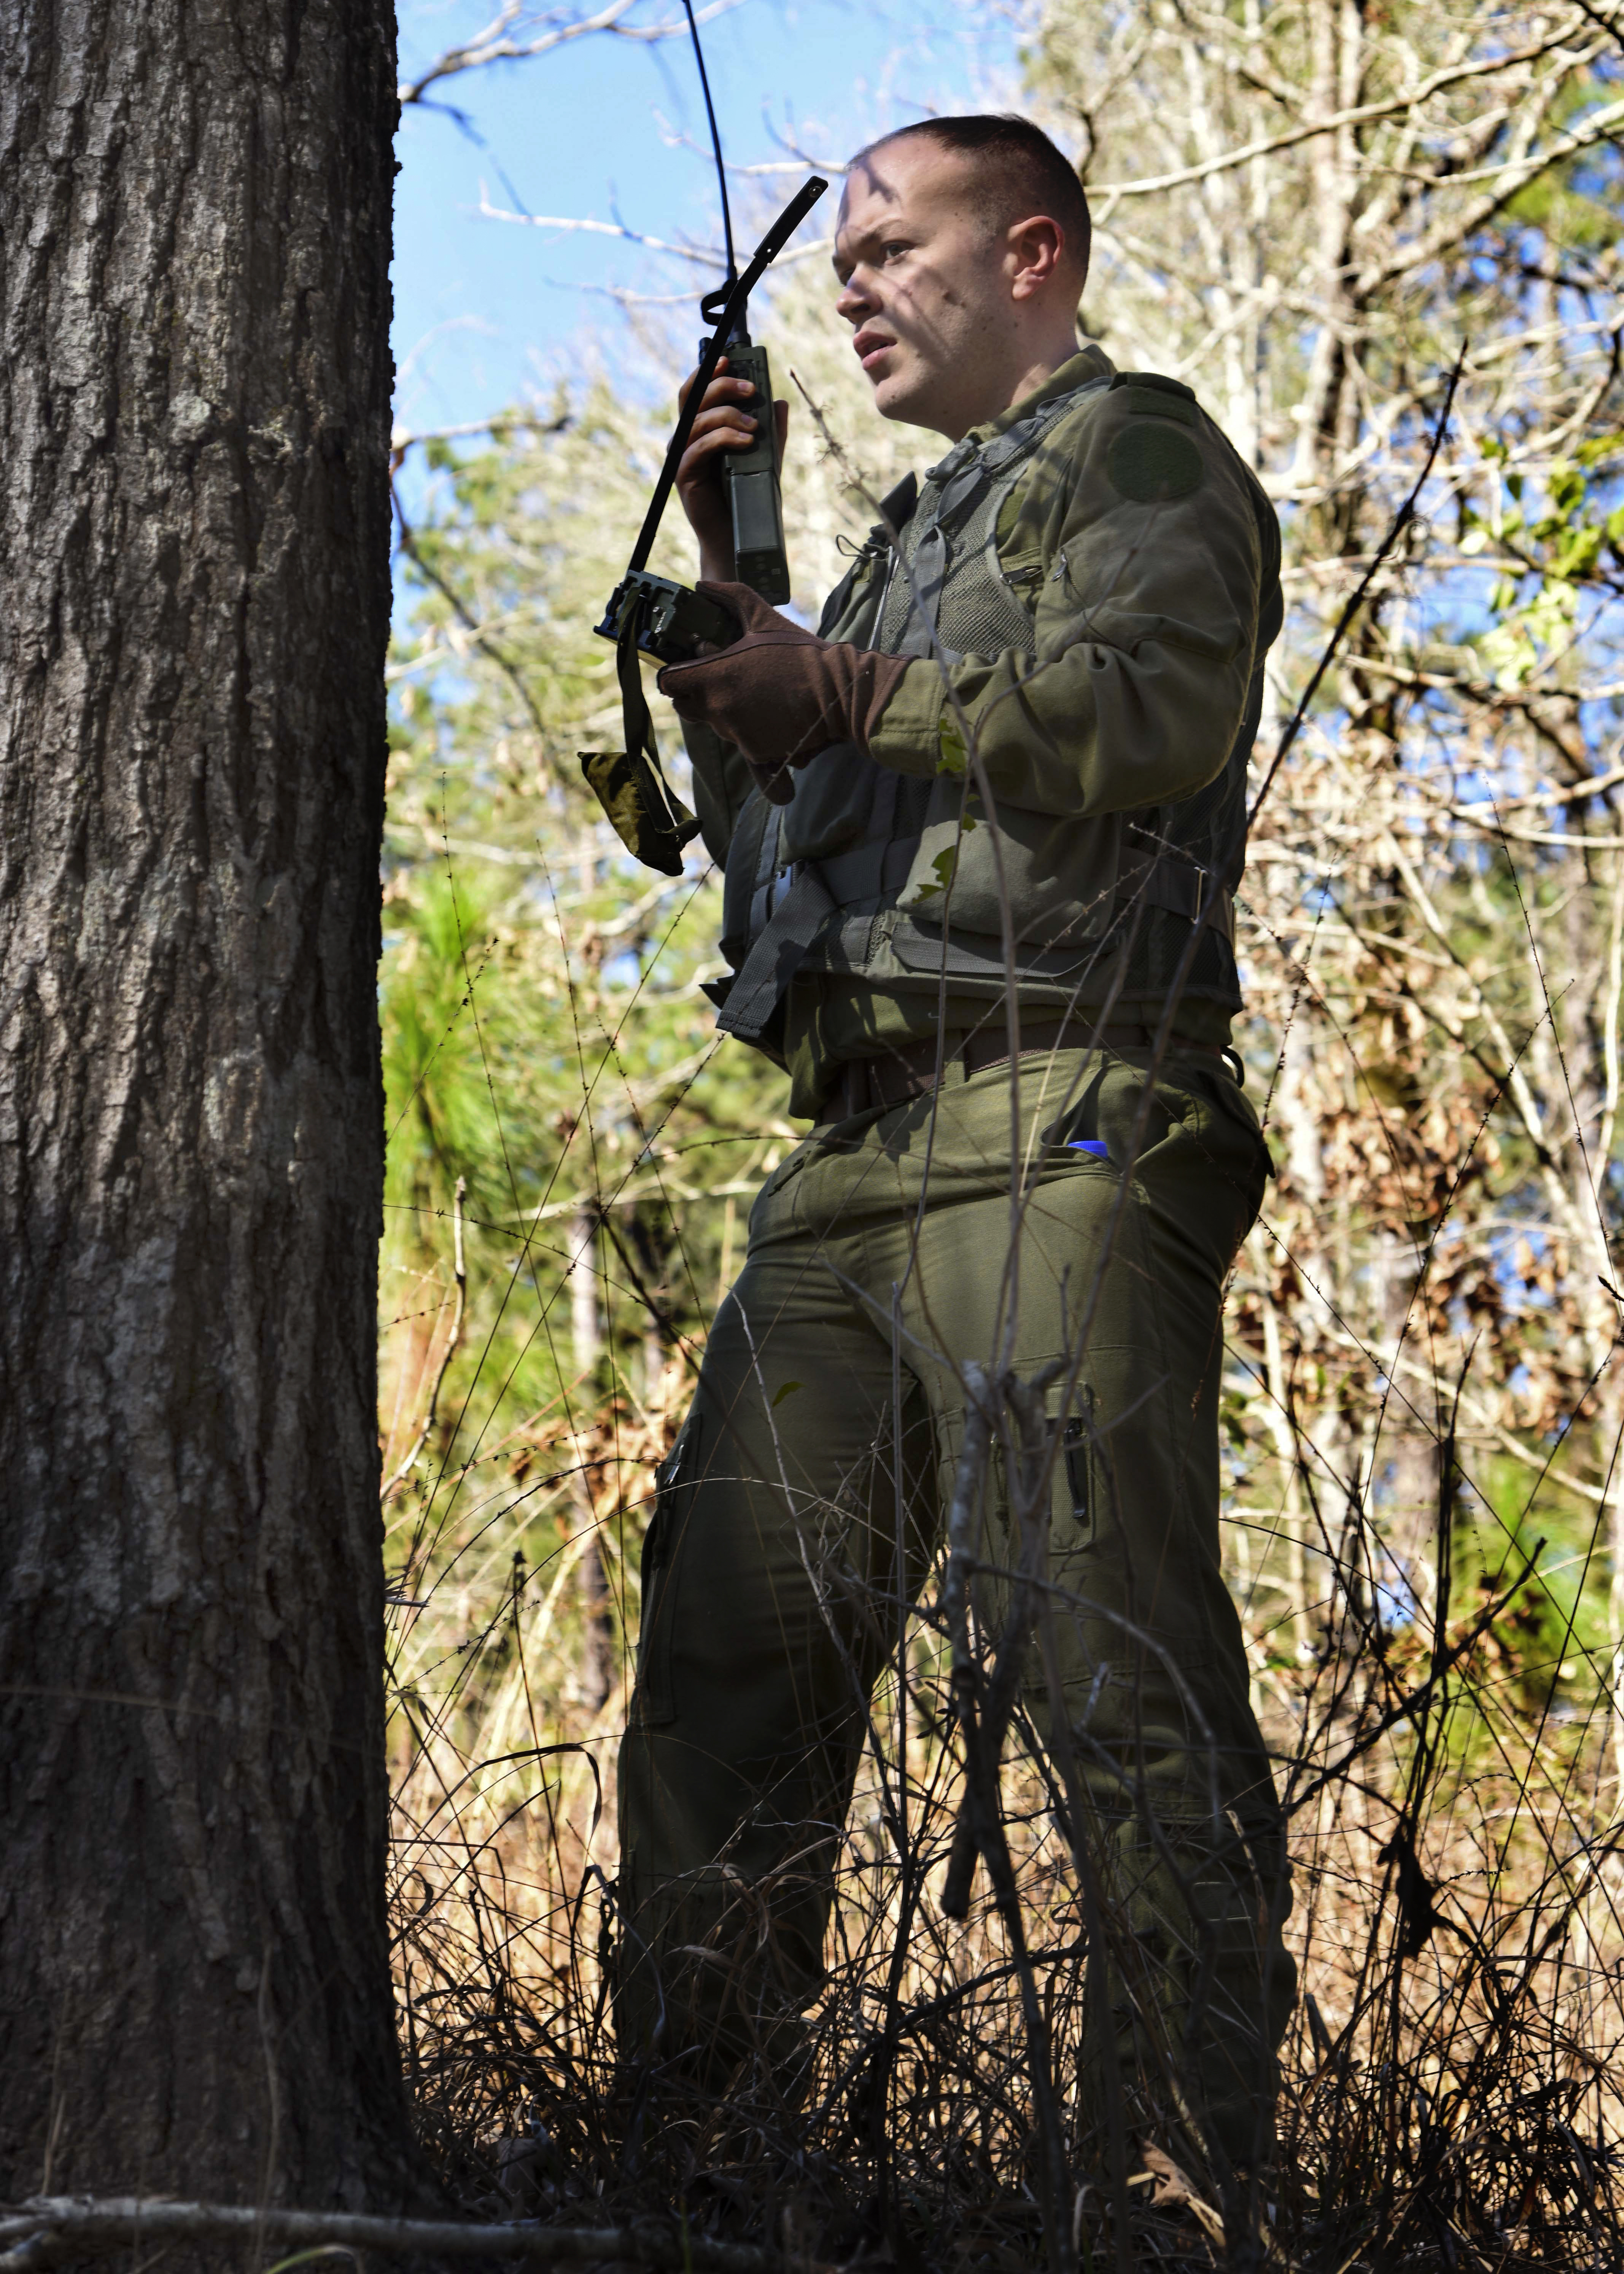 Royal Canadian Air Force Cpl. Teddy Lapkin, 436 Transport Squadron technical crewman, attempts to contact a C-130J during survival, evasion, resistance and escape training Feb. 10, 2017, near Alexandria, La. SERE training is conducted to aid aircrew in survival techniques such as building shelter, land navigation and procuring water to evade the enemy until they can be rescued. (U.S. Air Force photo by Senior Airman Stephanie Serrano)